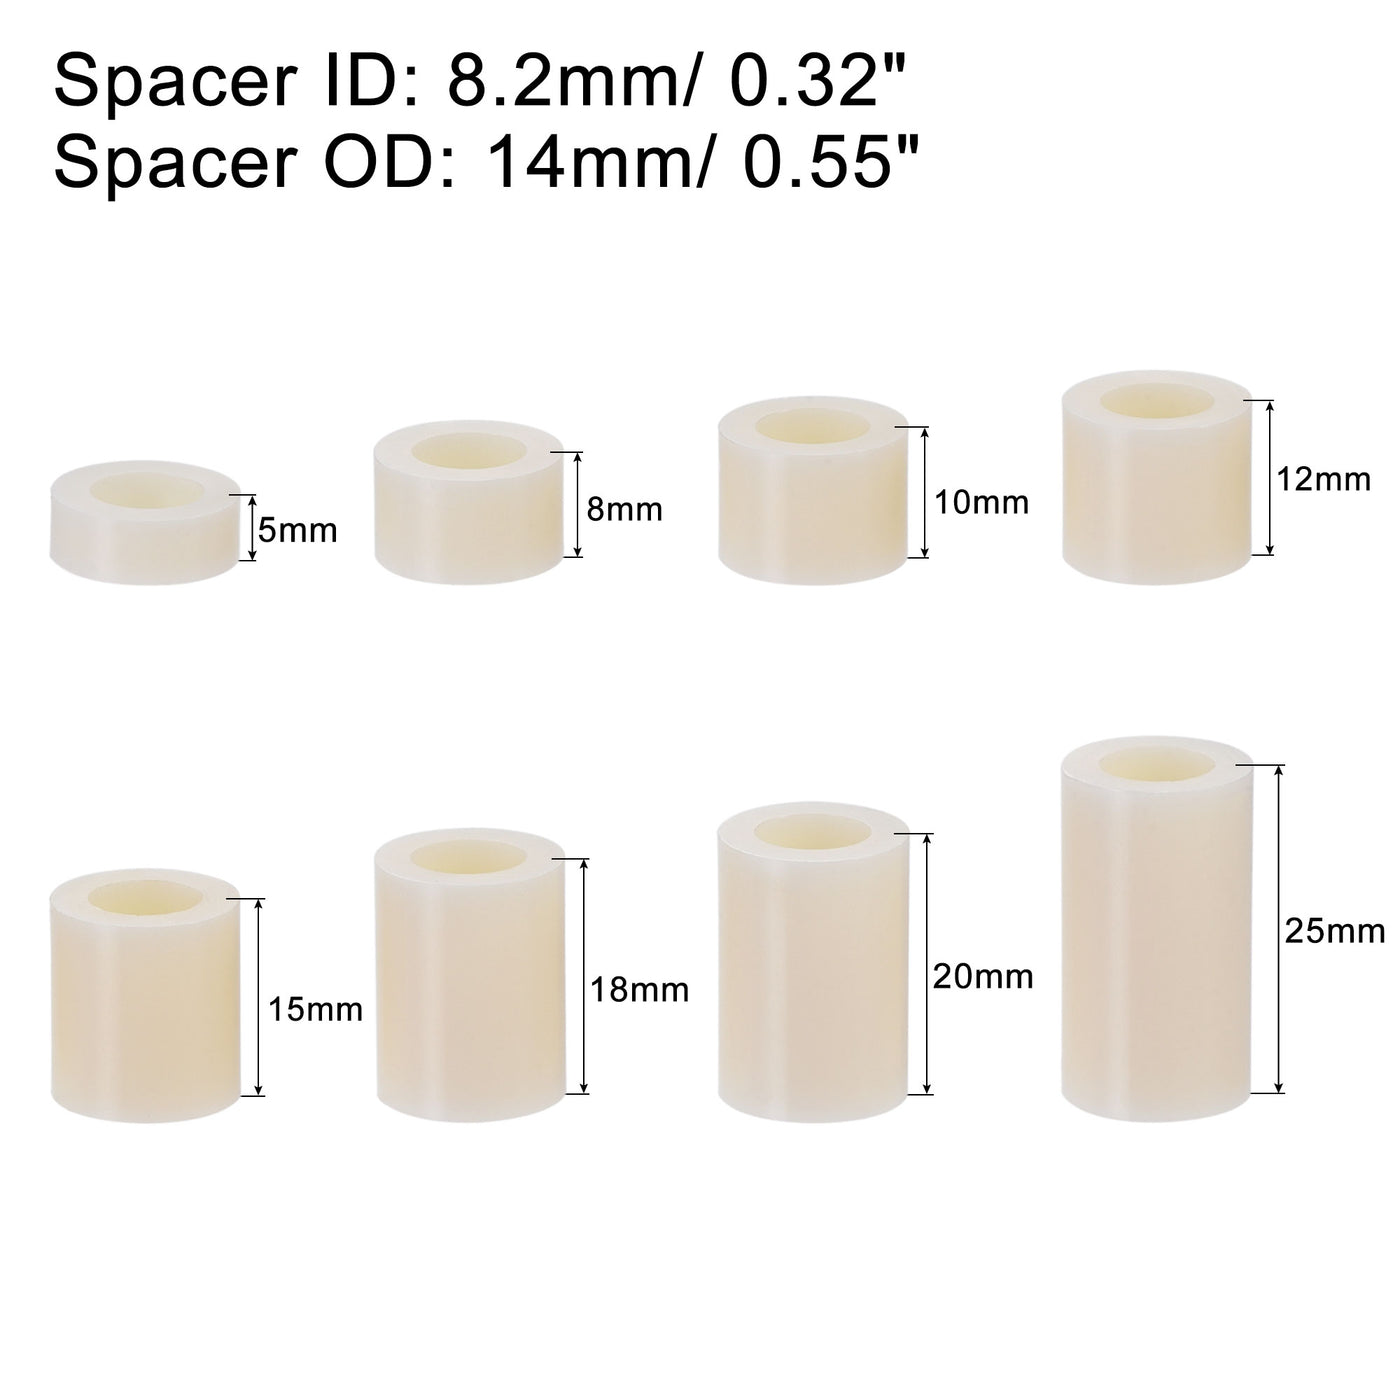 uxcell Uxcell ABS Round Spacer Assortment Kit ID 8.2mm OD 14mm, 8 Sizes Standoff, 80pcs